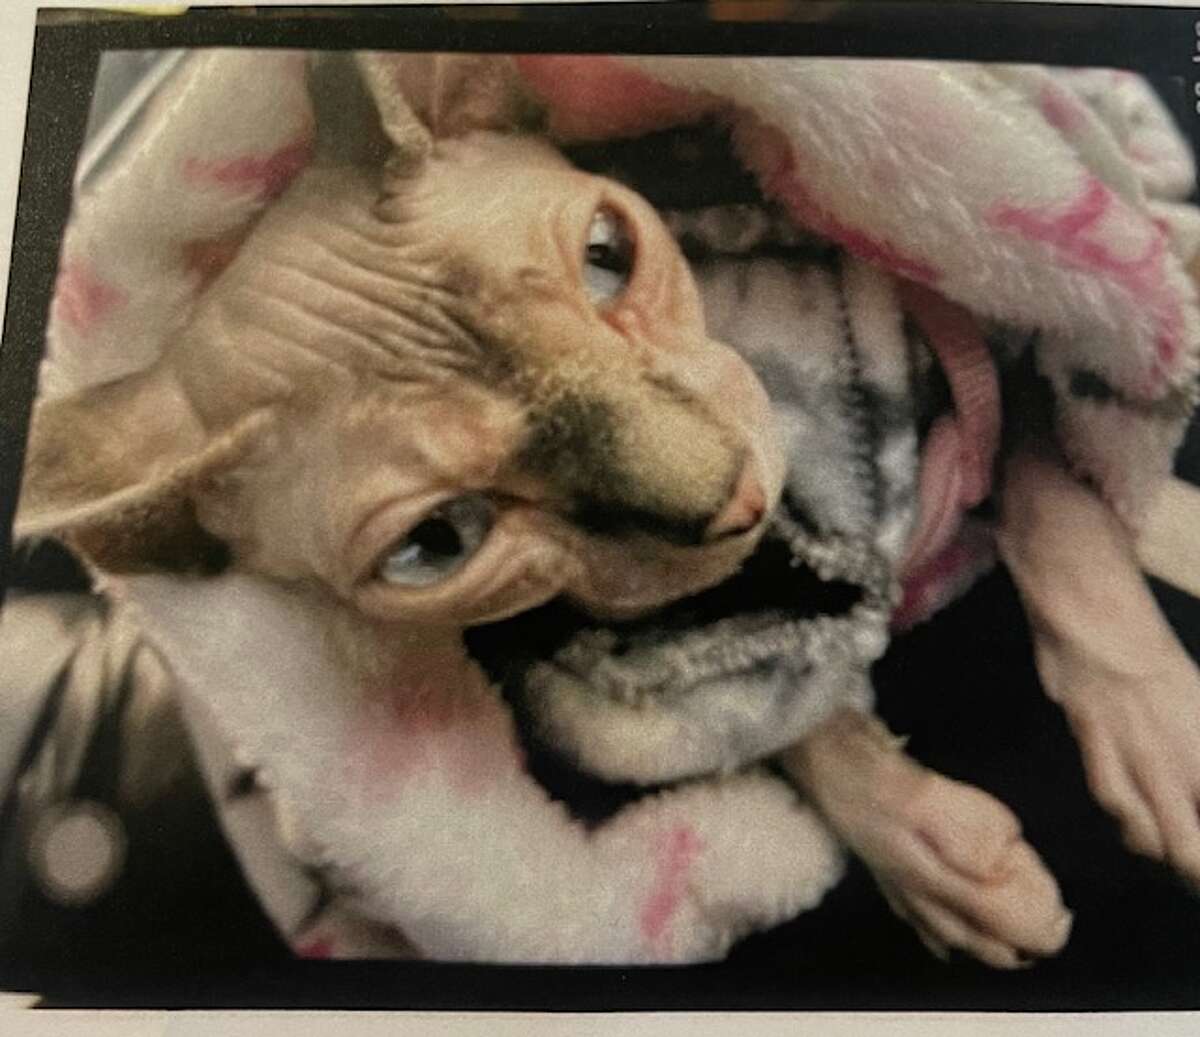 A hairless cat named Princess stolen from a Shelton hotel room in late January was reunited with its owner Saturday, according to Shelton police